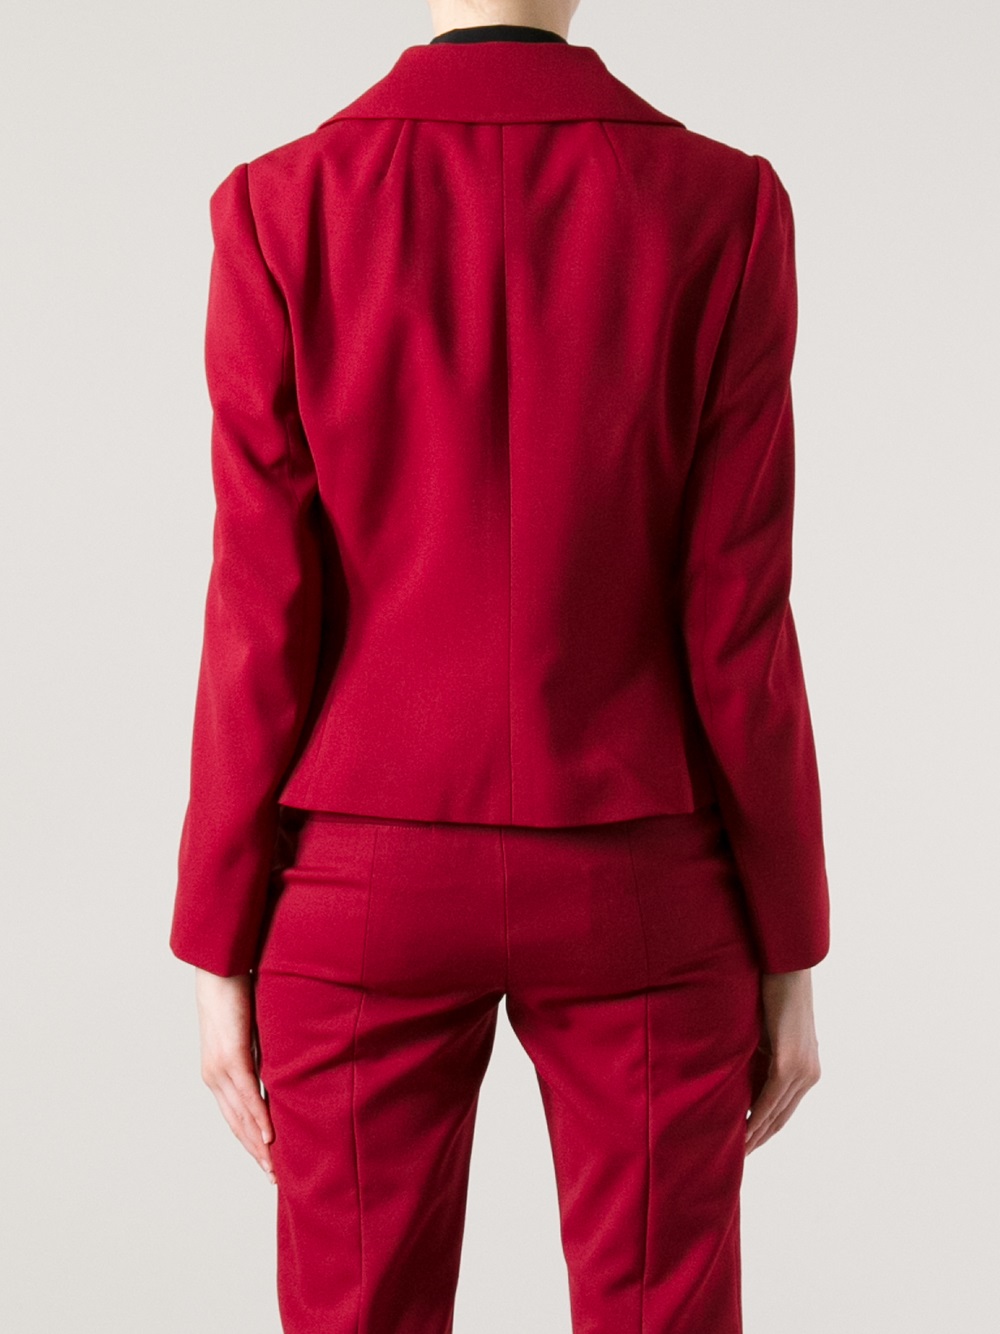 Lyst - Red Valentino Buttoned Jacket in Red